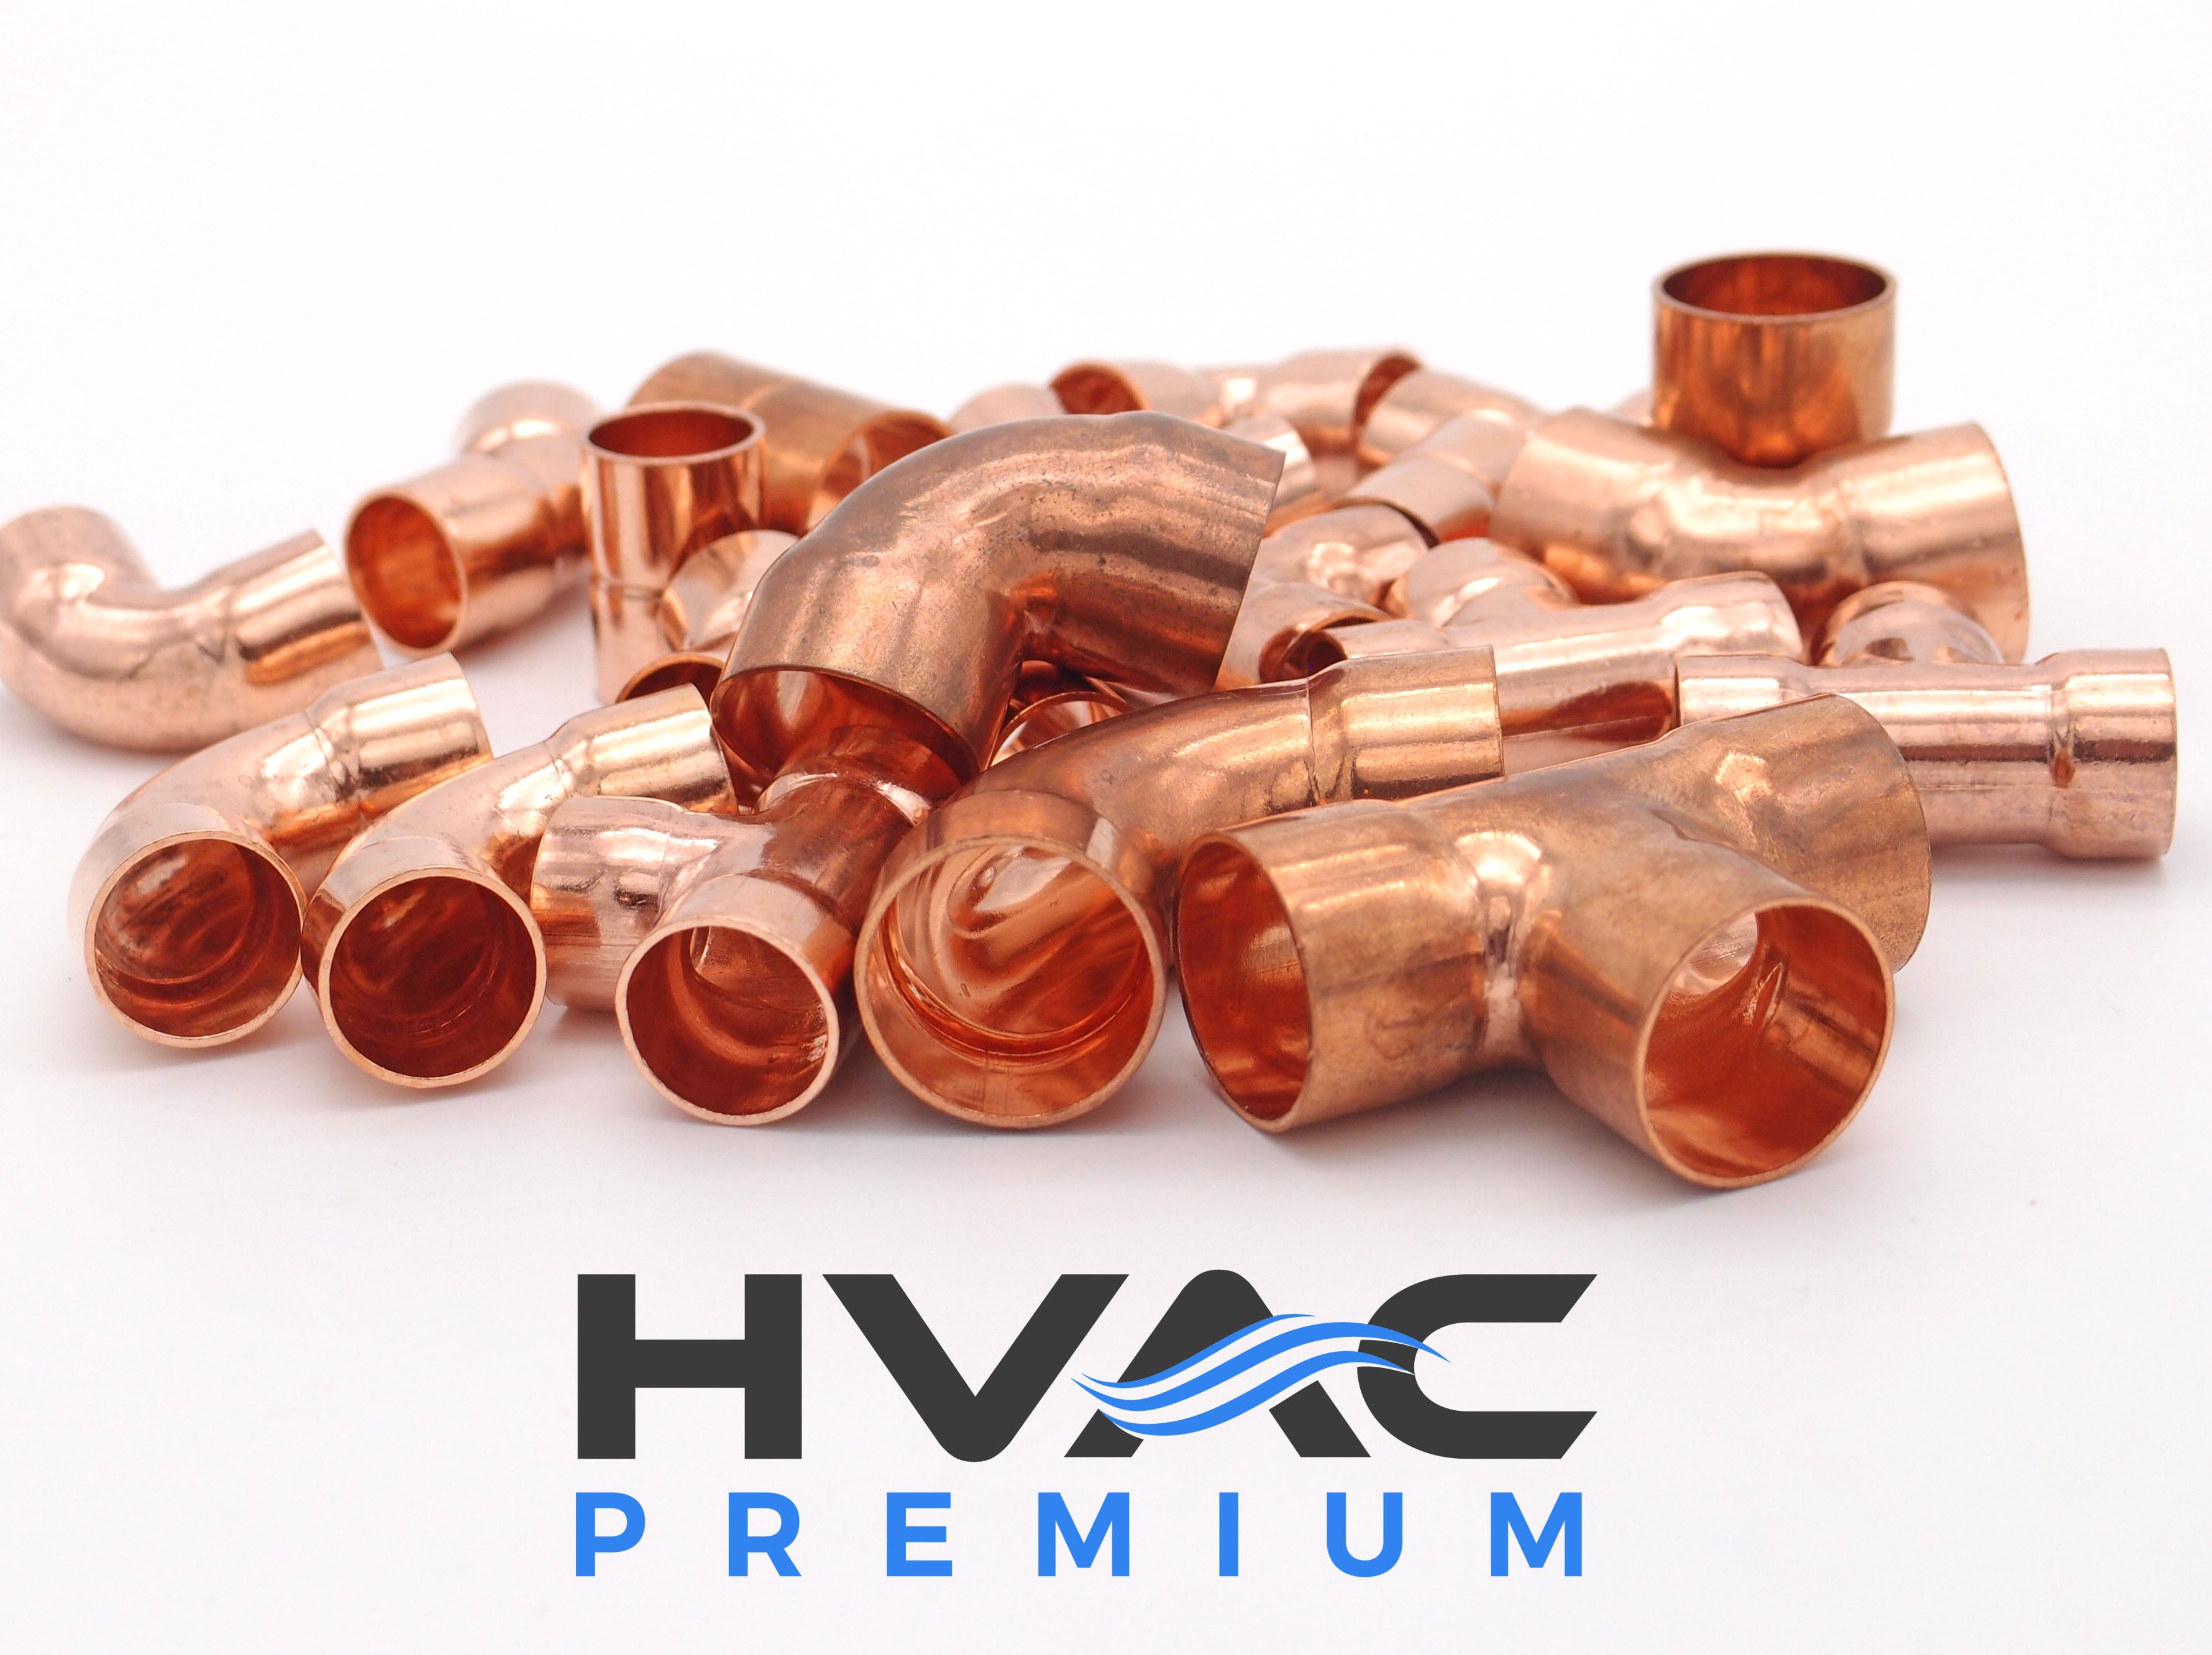 Copper Fitting 3/8 Inch (HVAC Outer Dimension) 1/4 Inch (Plumbing Inner Dimension) - Copper Tee & HVAC – 99.9% Pure Copper - 5 Pack